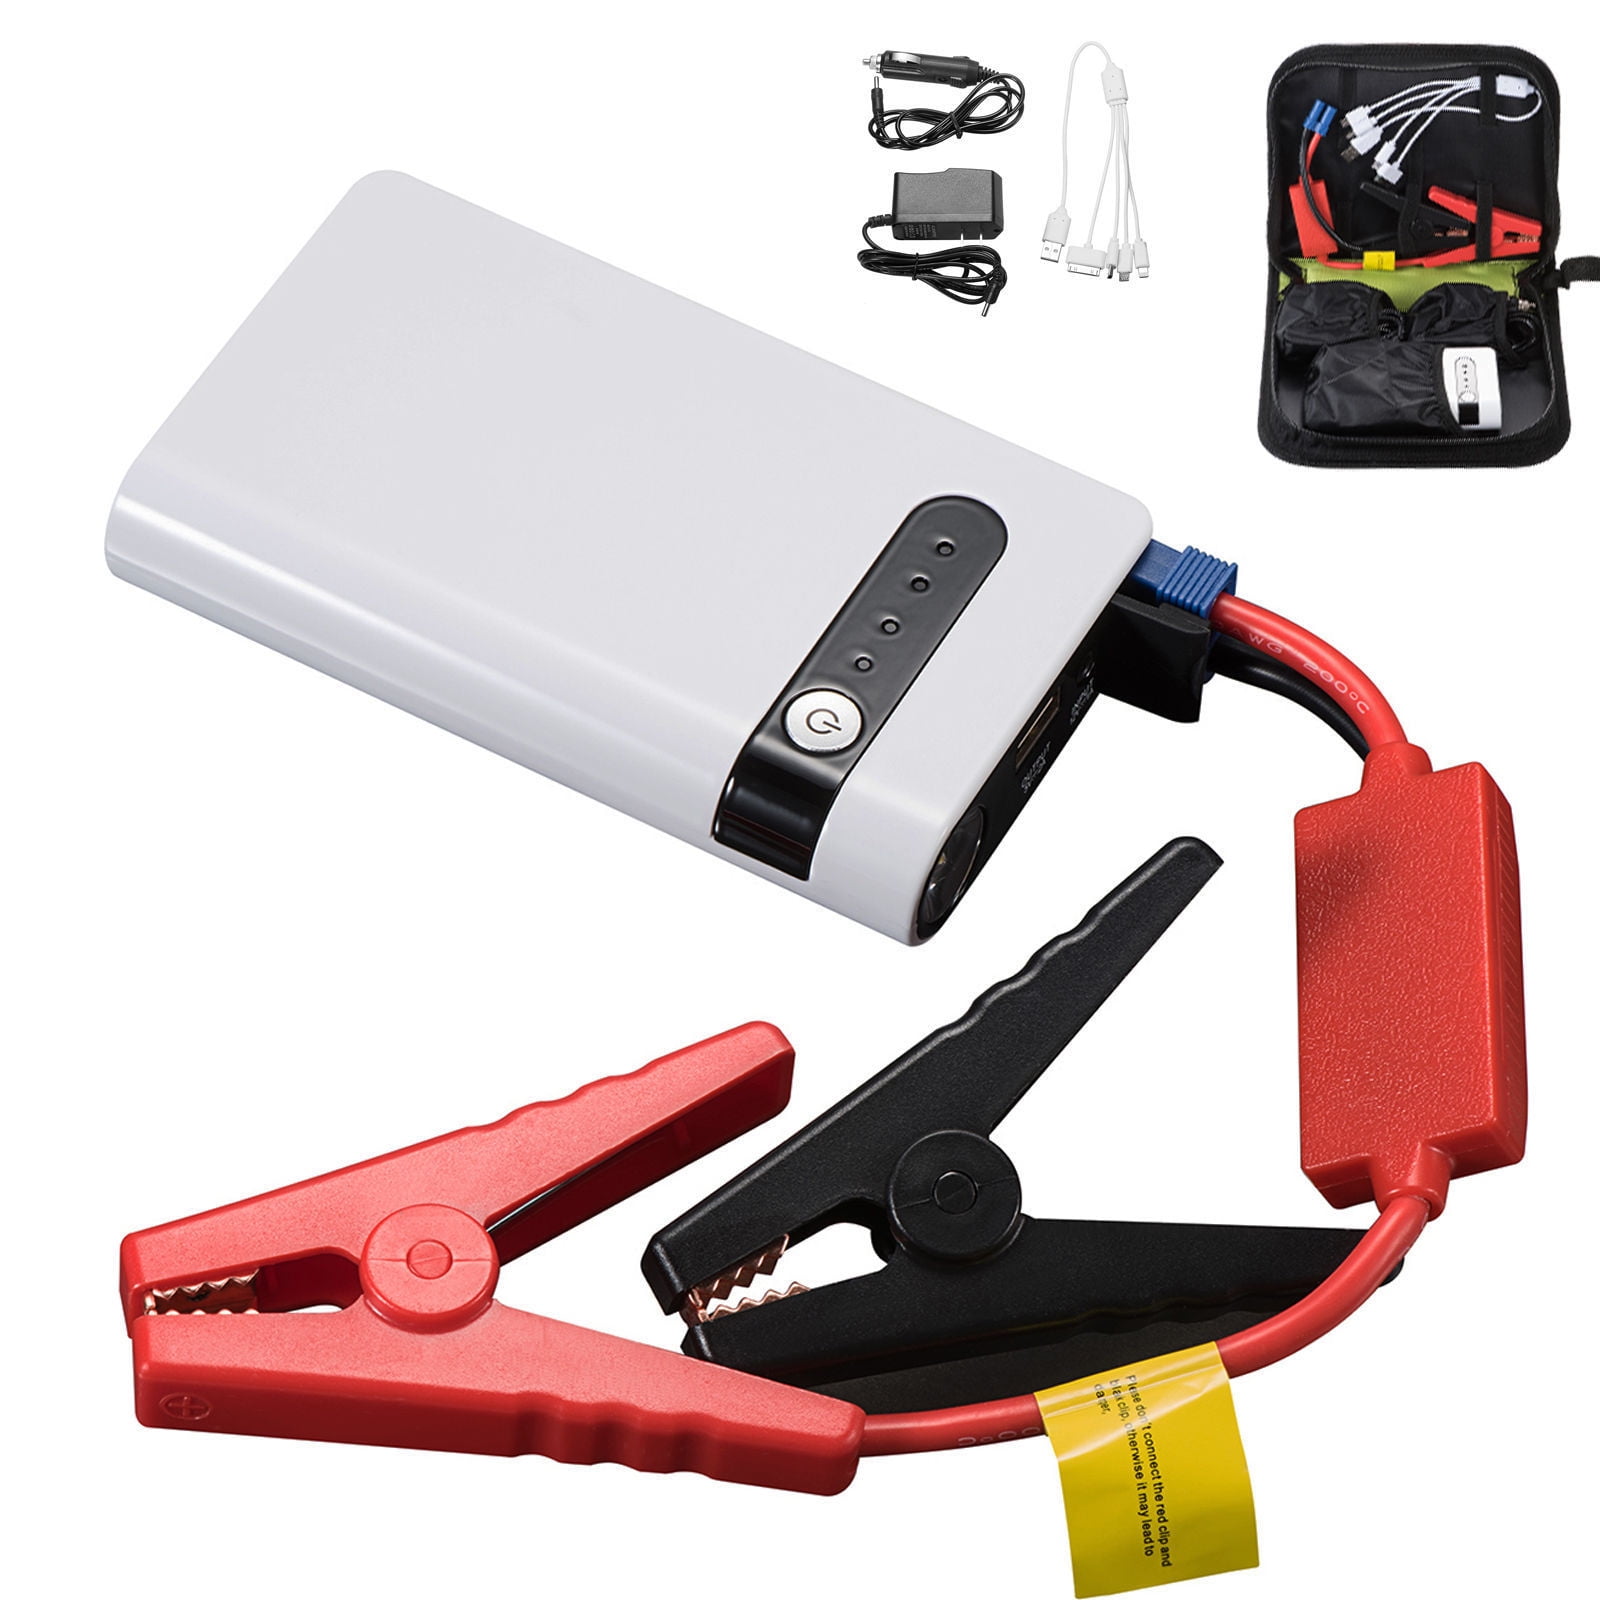 Details about   Charger Car Battery Starter Jump Power Booster 12V 5A Portable Bank Smart Auto 